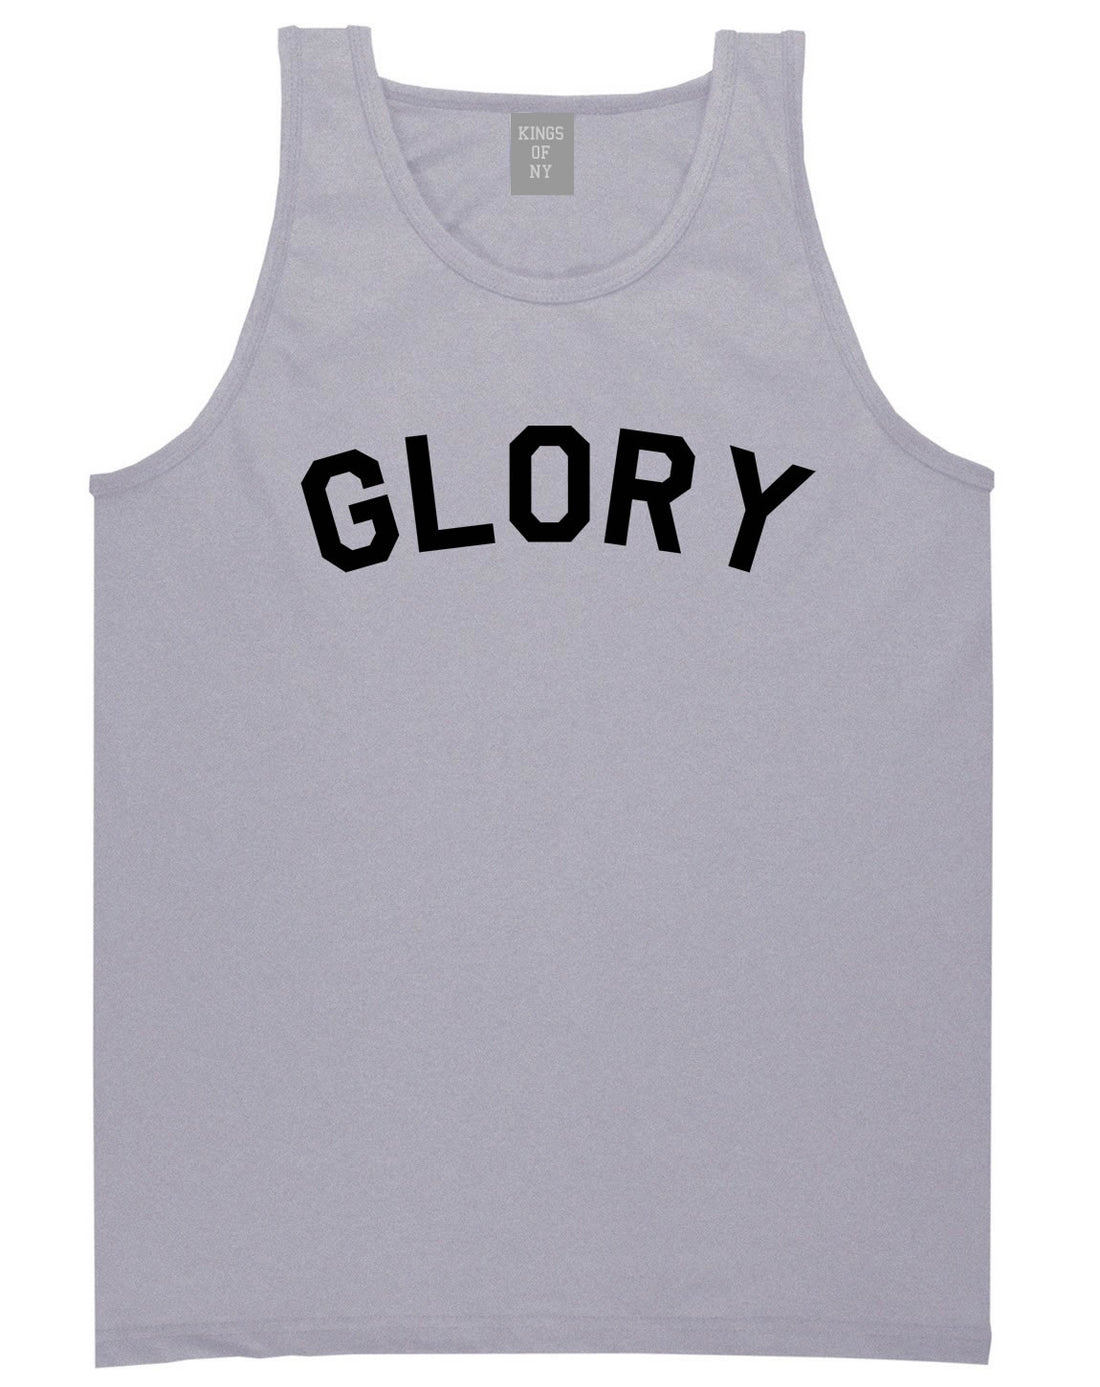 GLORY New York Champs Jersey Tank Top in Grey